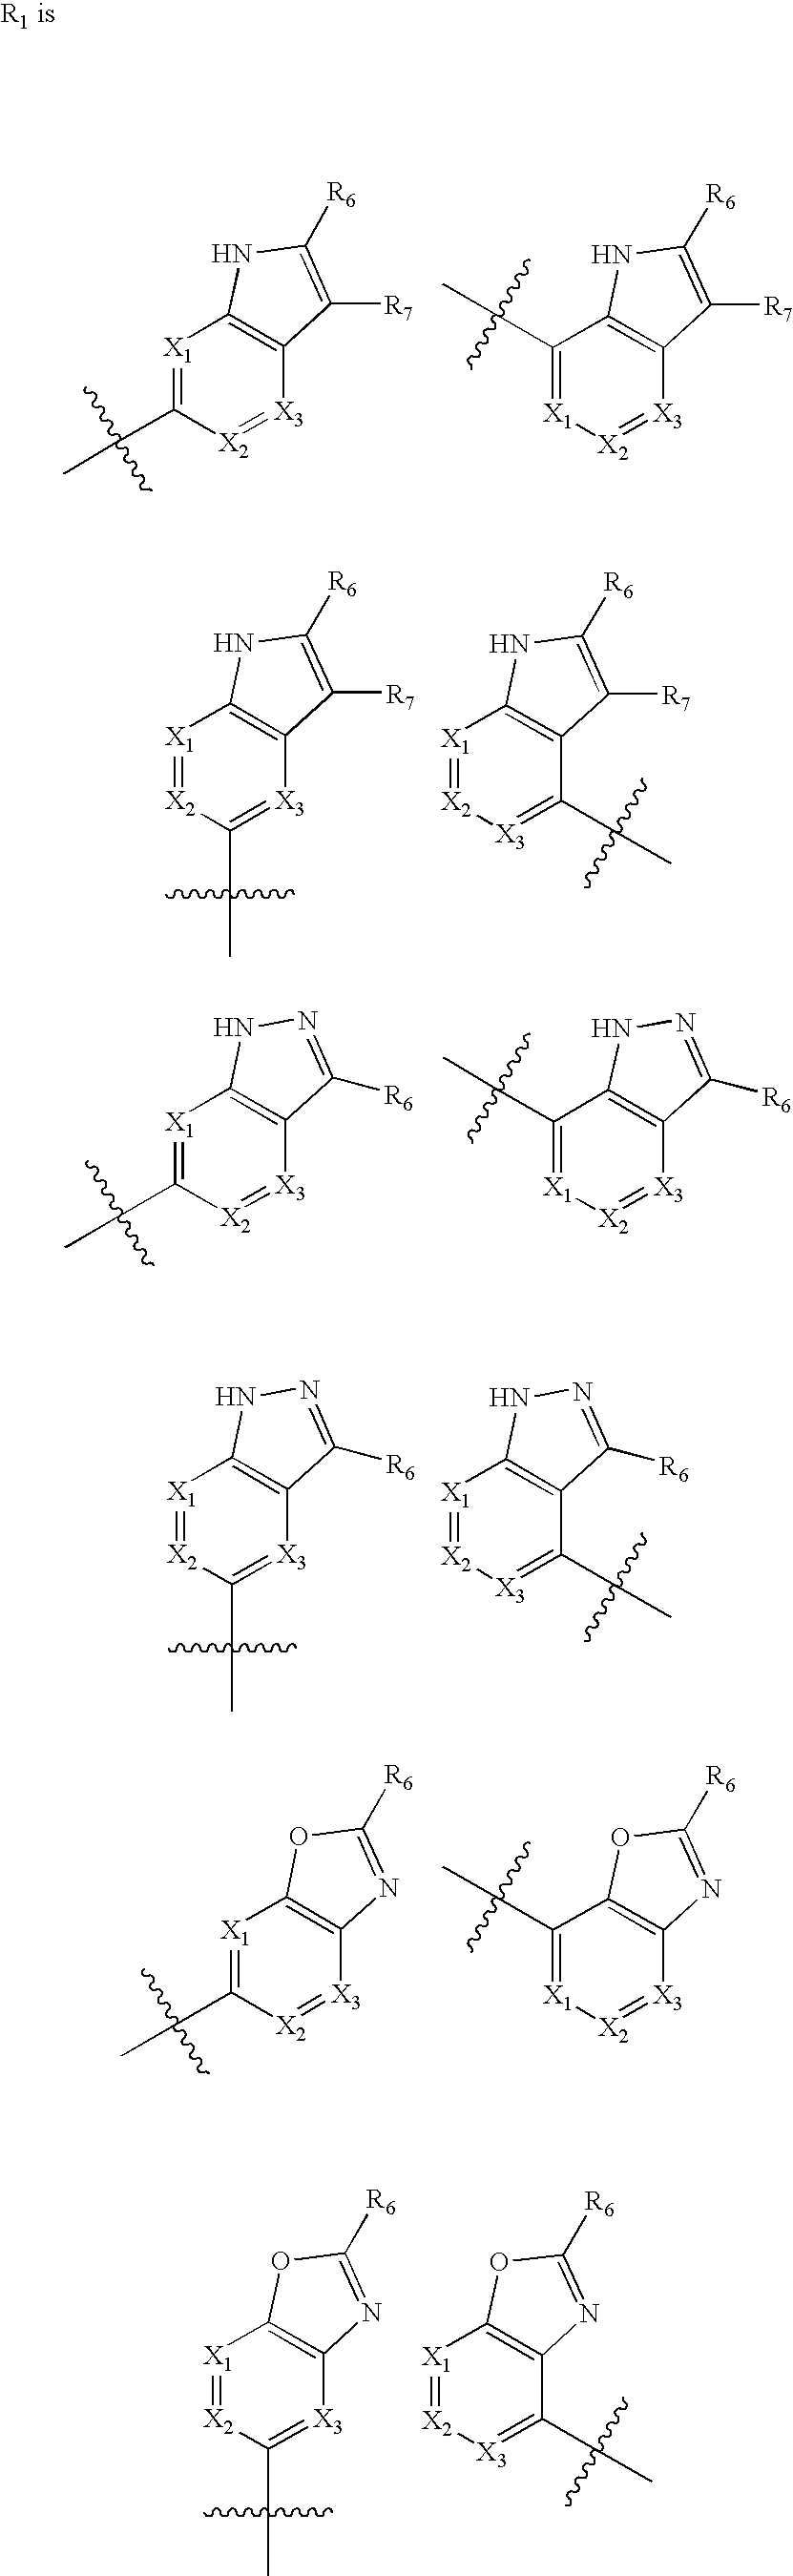 Certain heterocyclic substituted imidazo[1,2-A]pyrazin-8-ylamines and methods of inhibition of Bruton's tyrosine kinase by such compounds